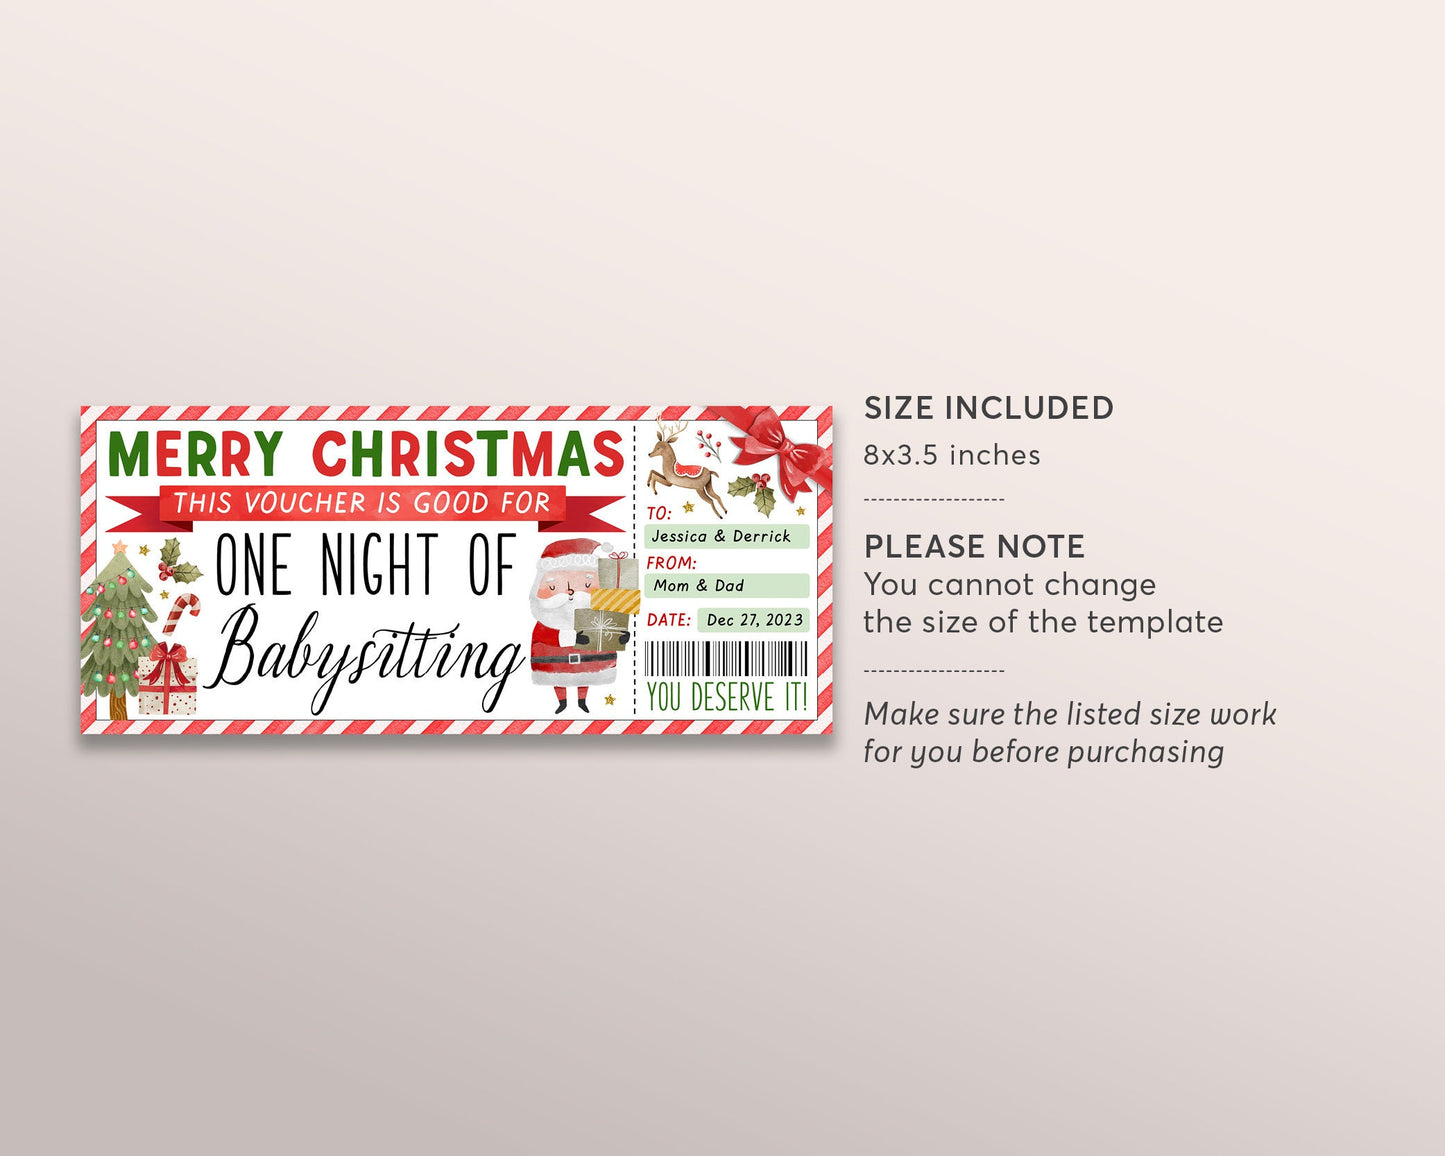 Christmas Babysitting Gift Coupon Editable Template, Babysitter Gift Ticket Voucher, Surprise New Mom Certificate Gift Card Printable